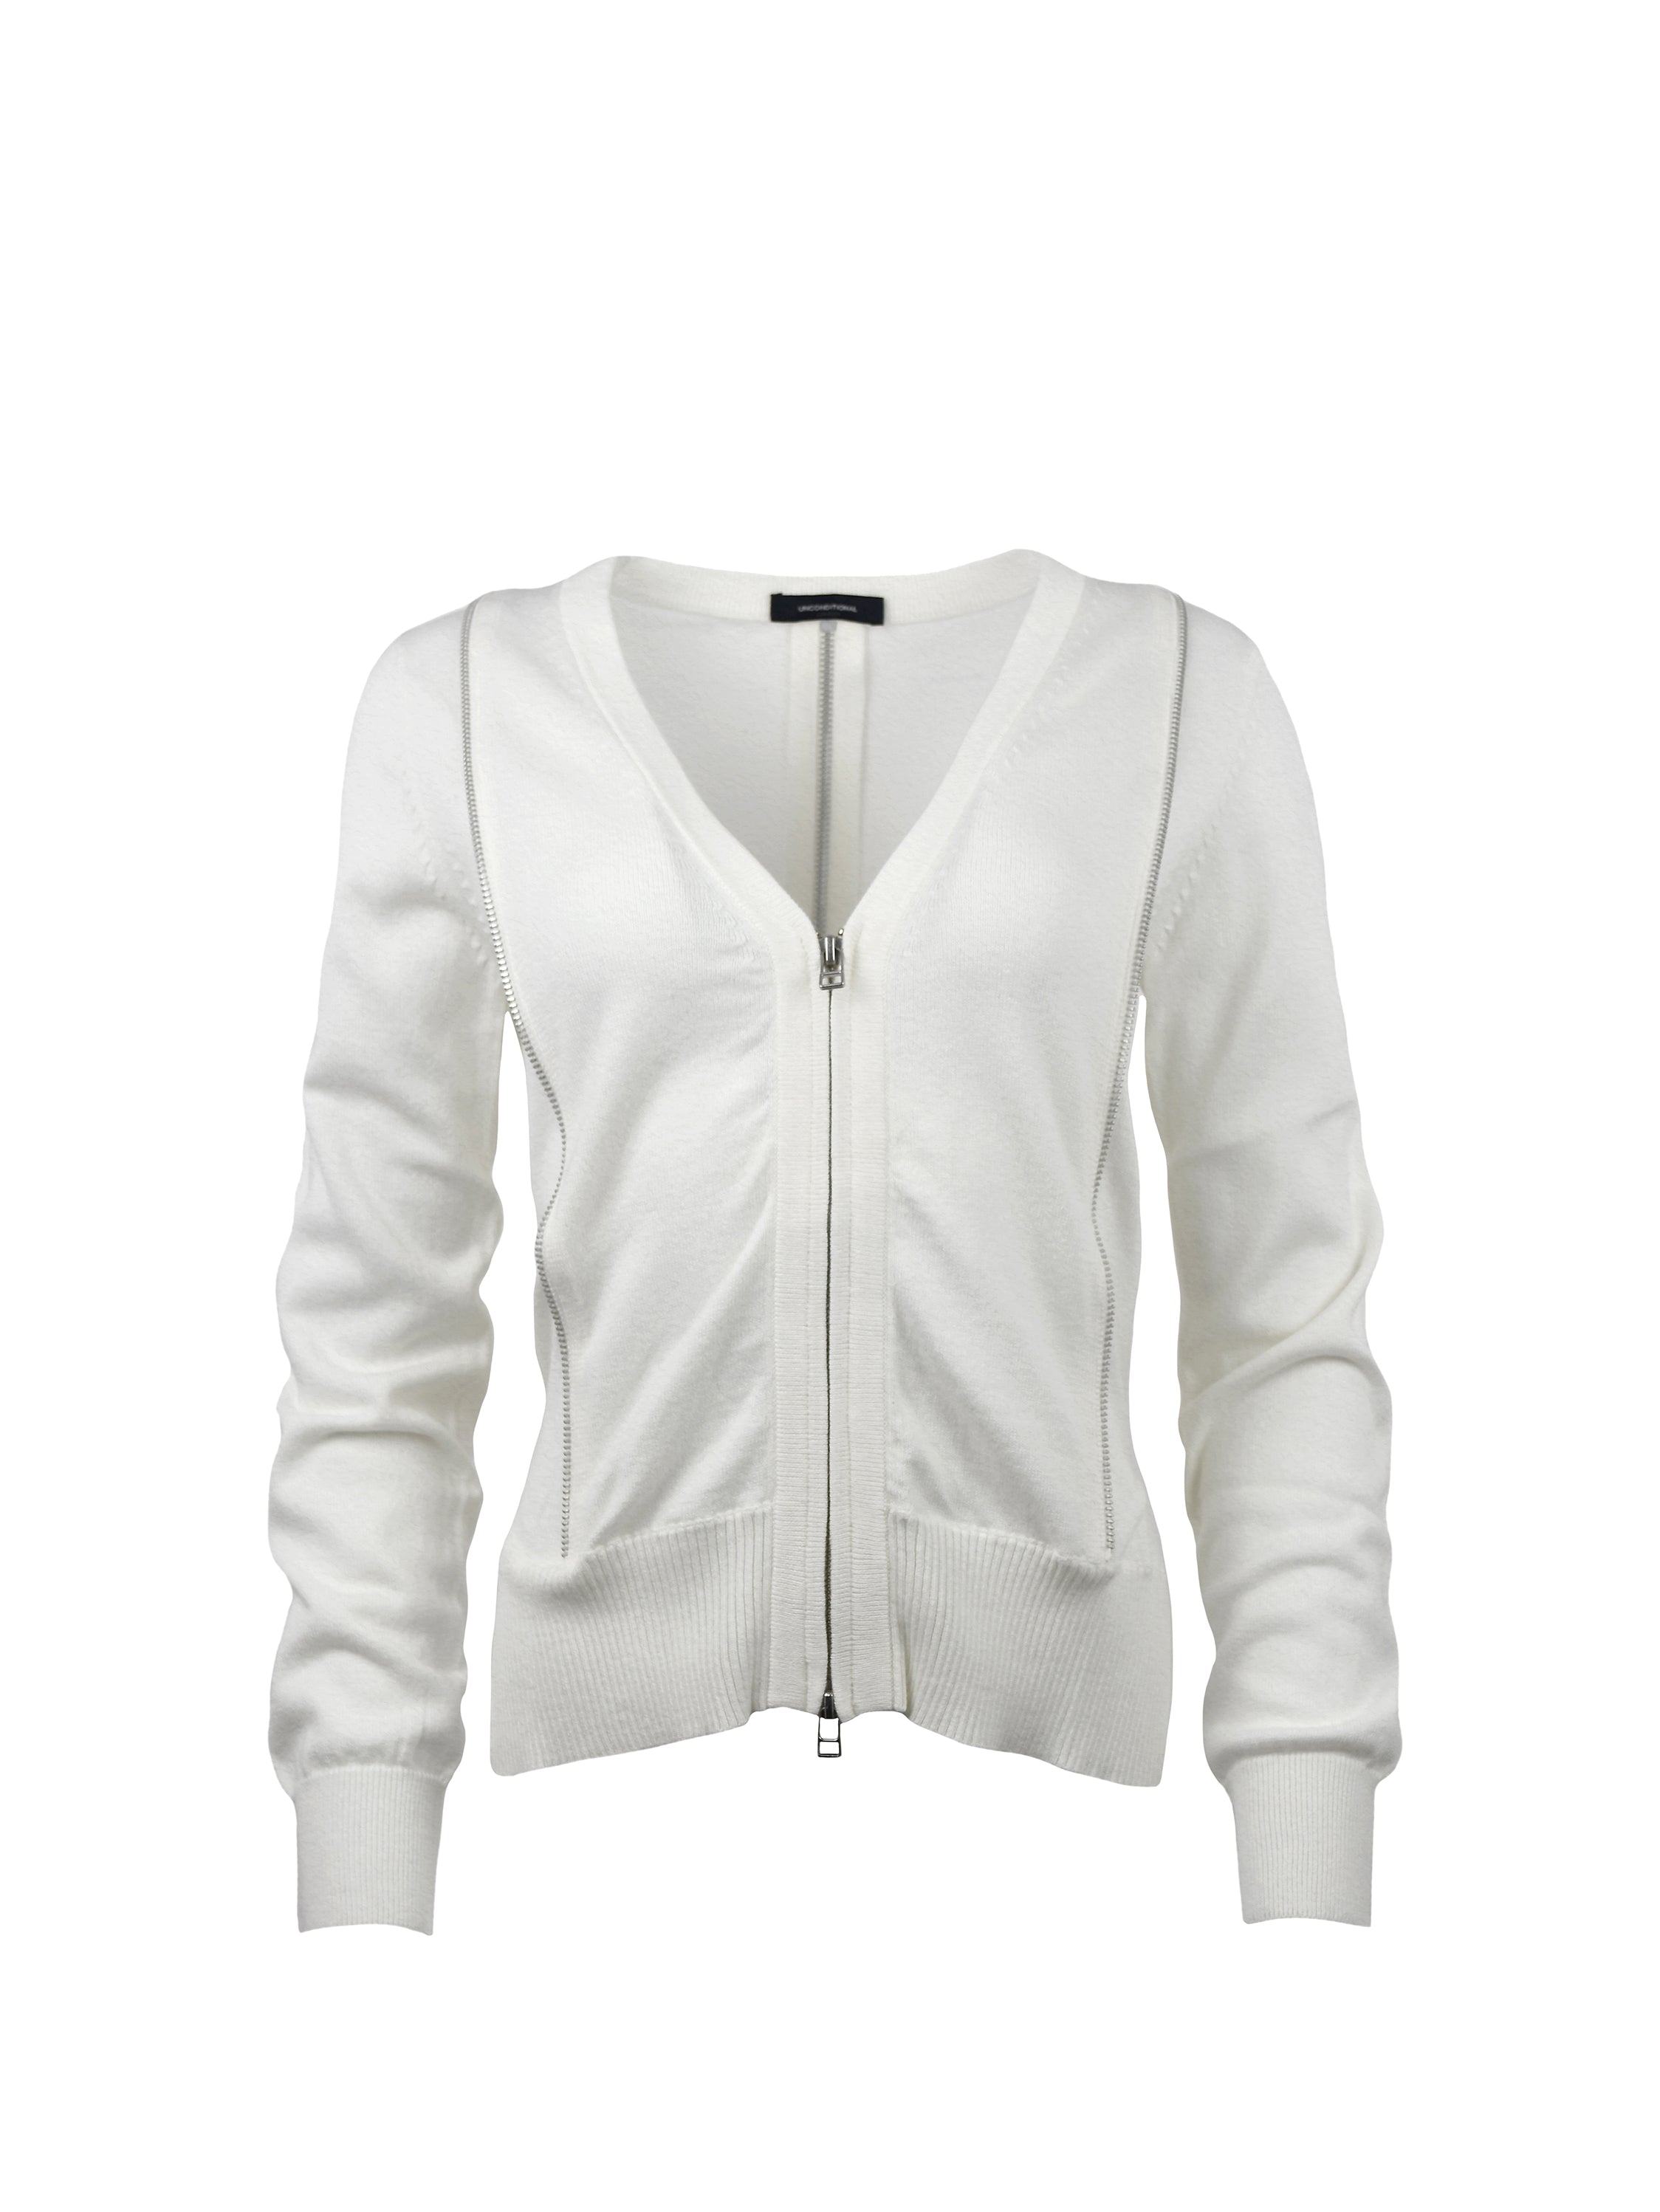 WHITE CARDIGAN WITH SILVER ZIP DETAILS